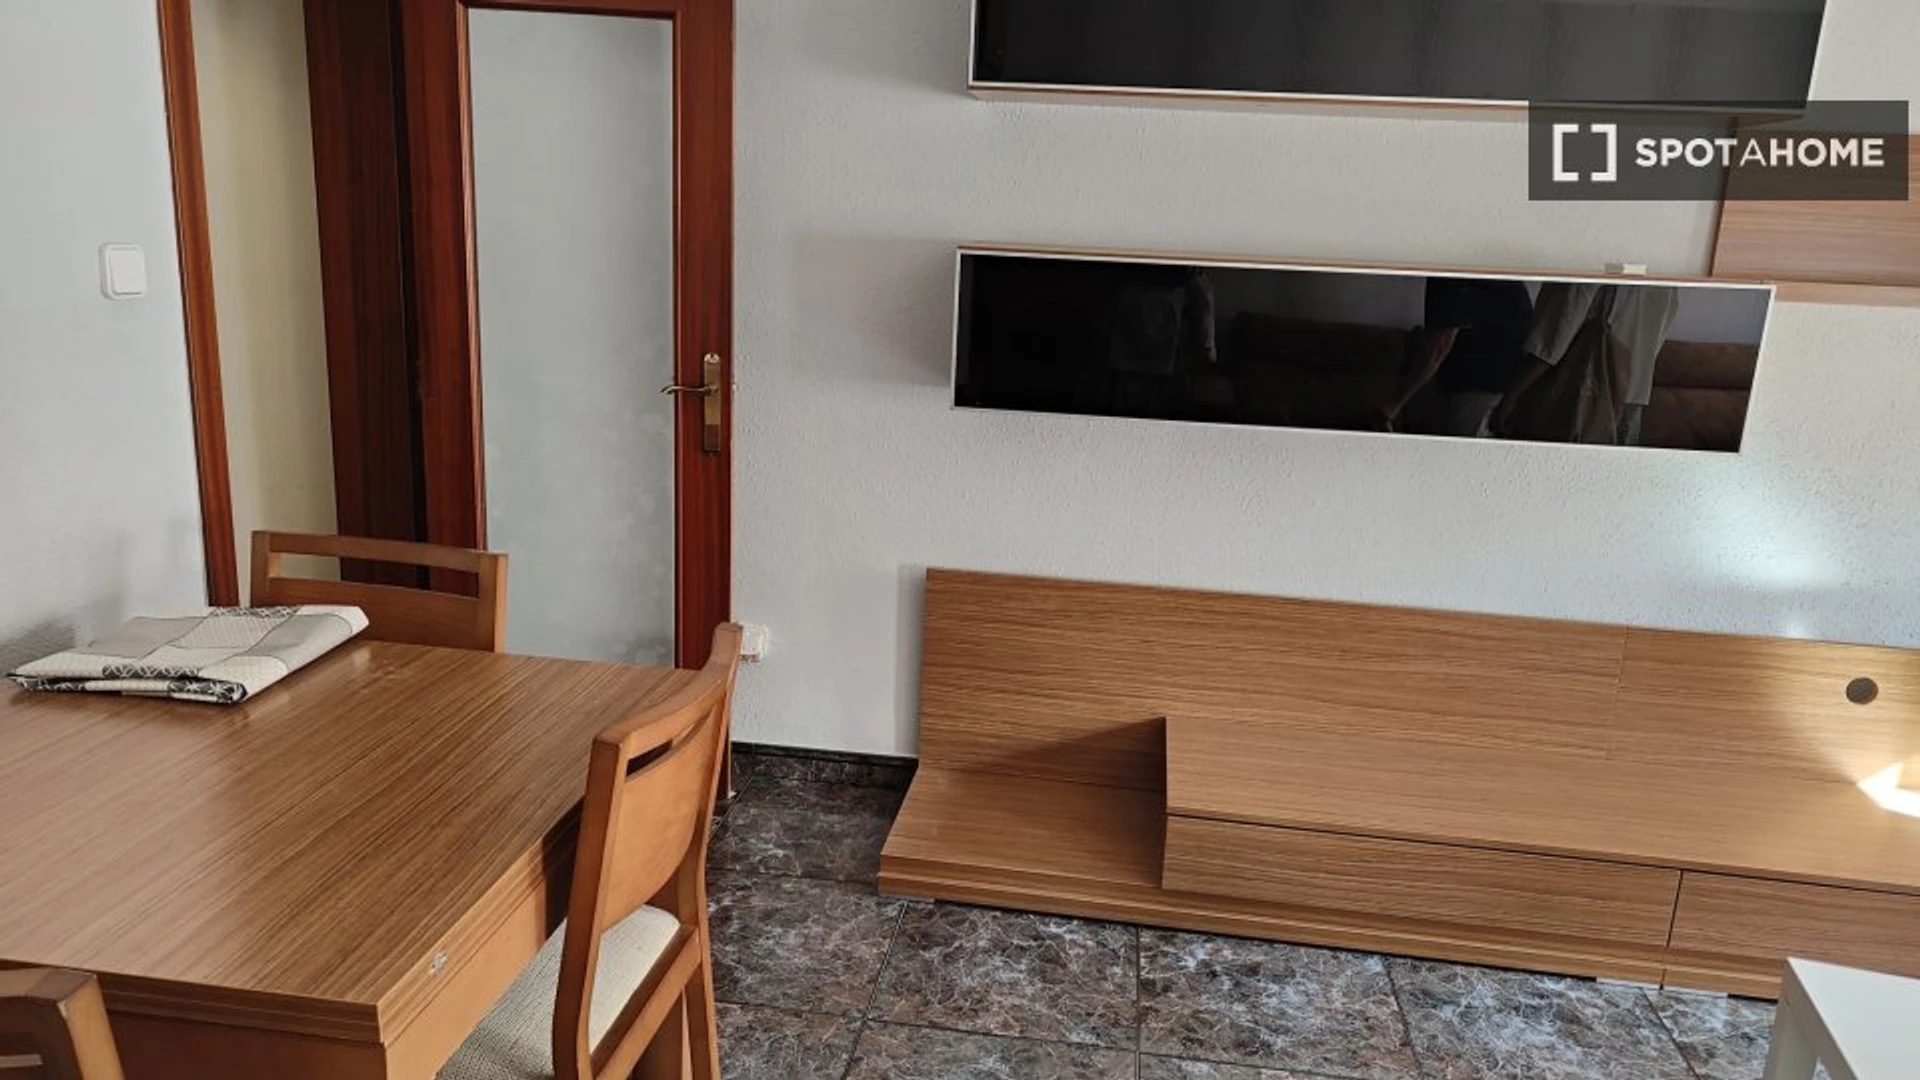 Entire fully furnished flat in Cerdanyola Del Vallès